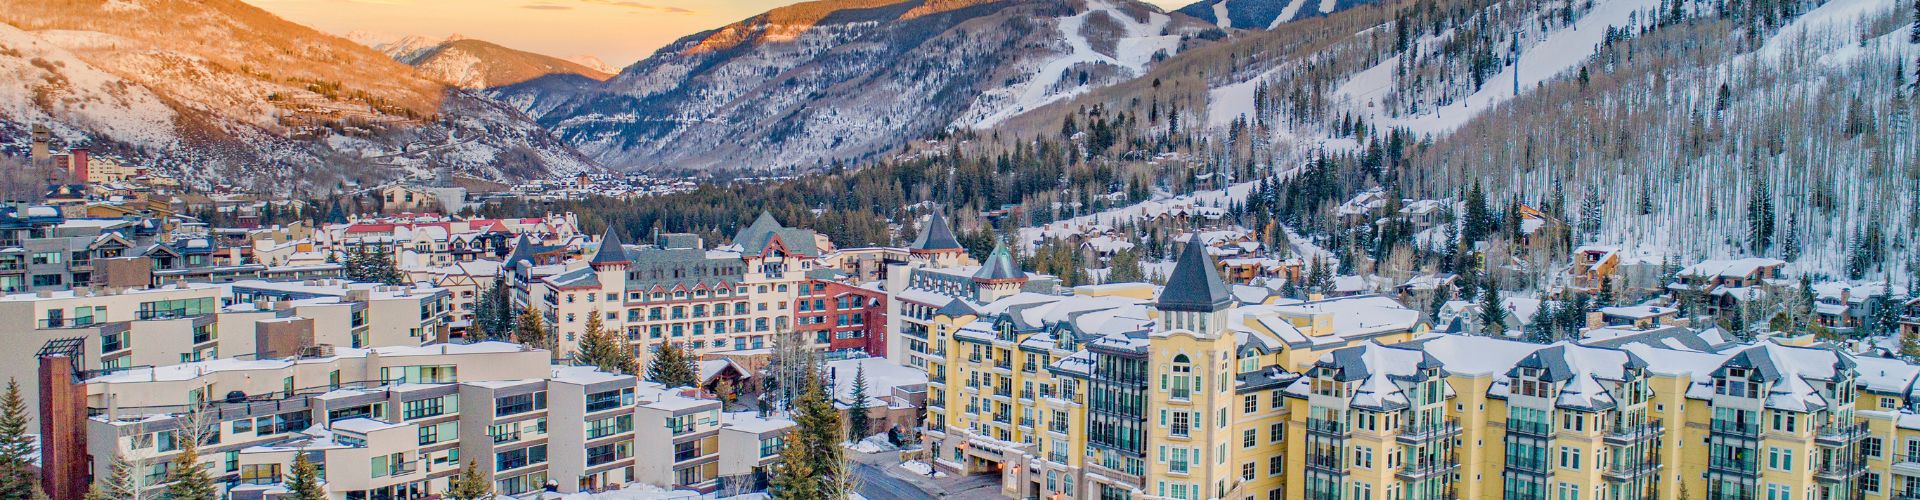 panoramic view of Vail, CO nestled at the base of the mountains